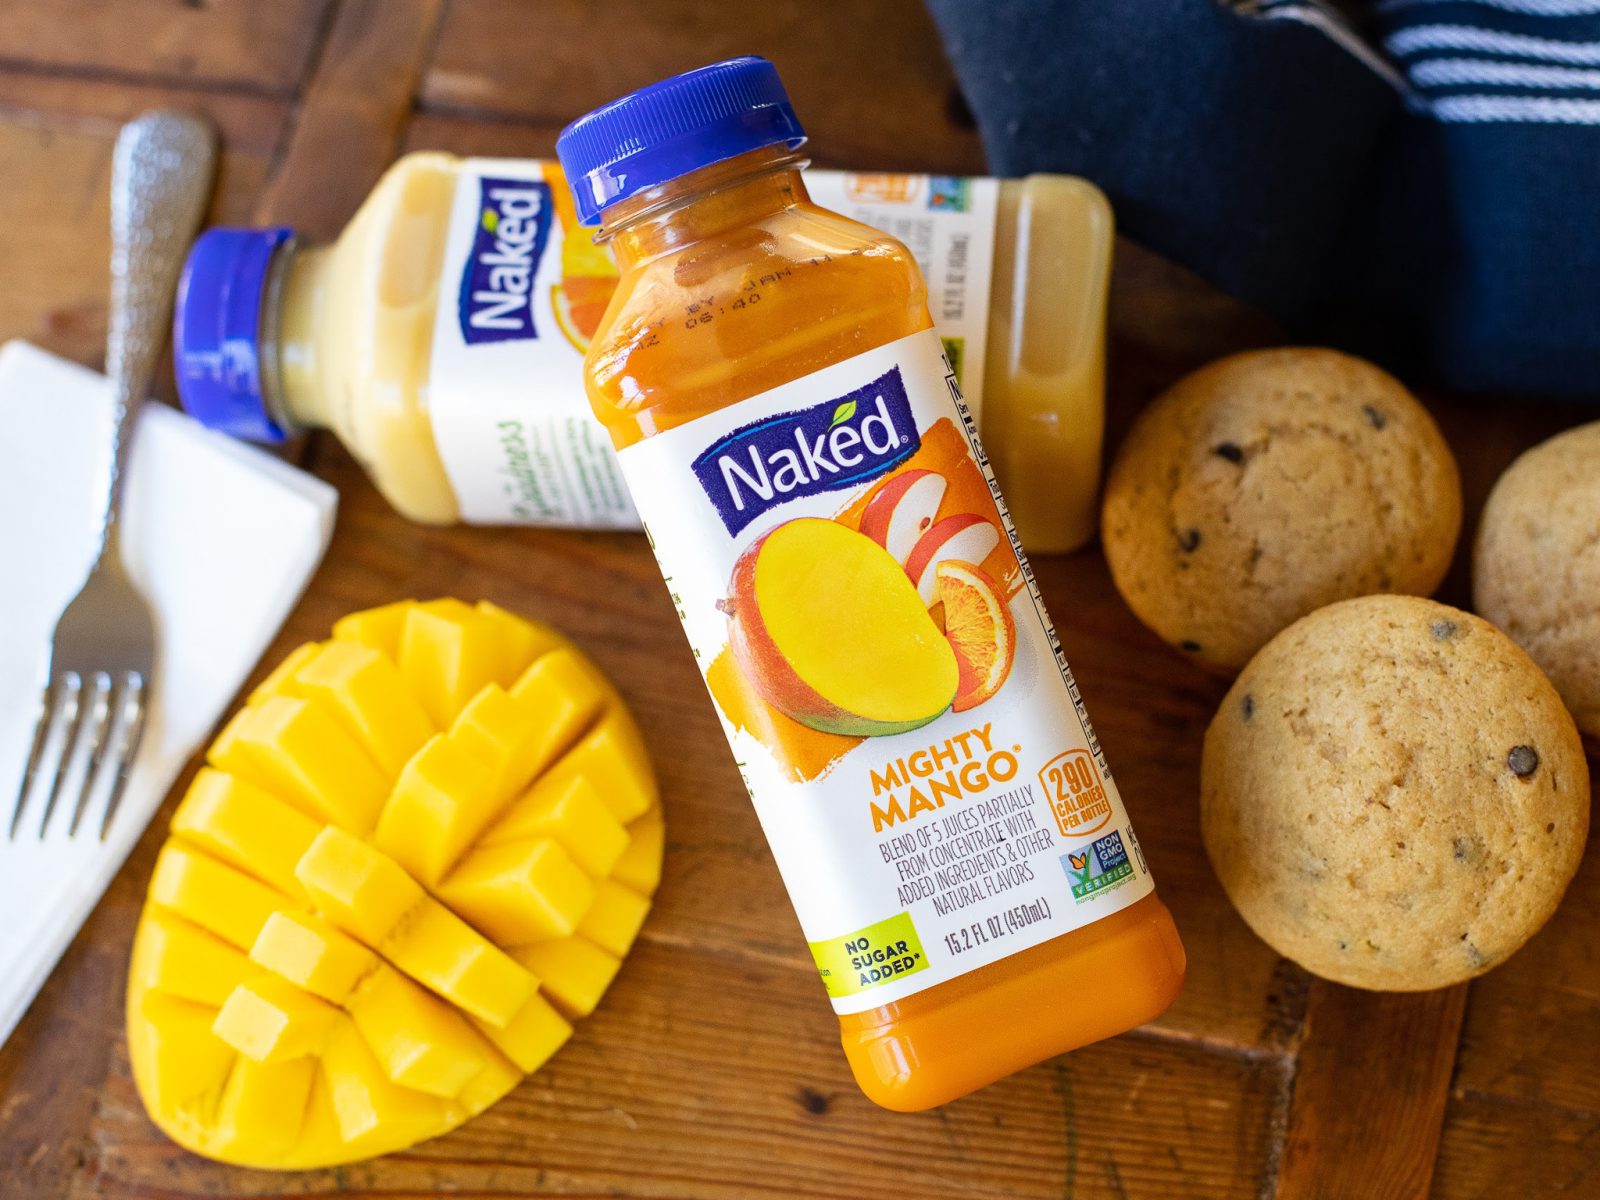 Grab The Bottles Of Naked Juice For As Low As $2.16 Each At Publix